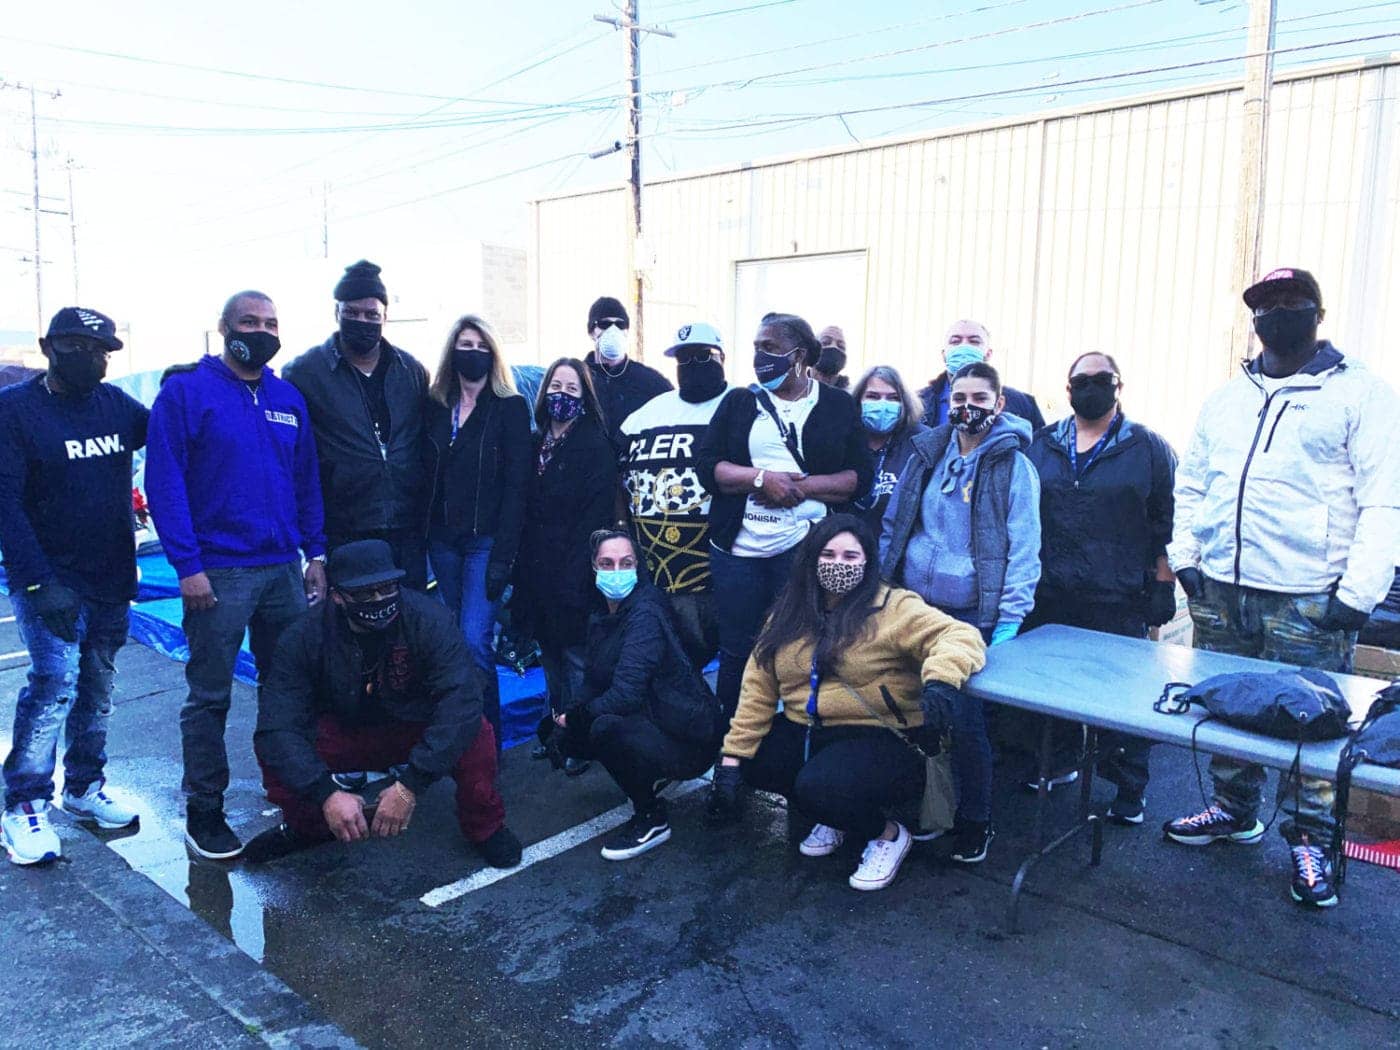 Mother-Browns-coat-giveaway-Shamann-Adult-Probation-Nova-Westside-Positive-Direction-122120-by-Malik-1400x1050, Positive Directions Equals Change: Resiliency, character and hope, Local News & Views 